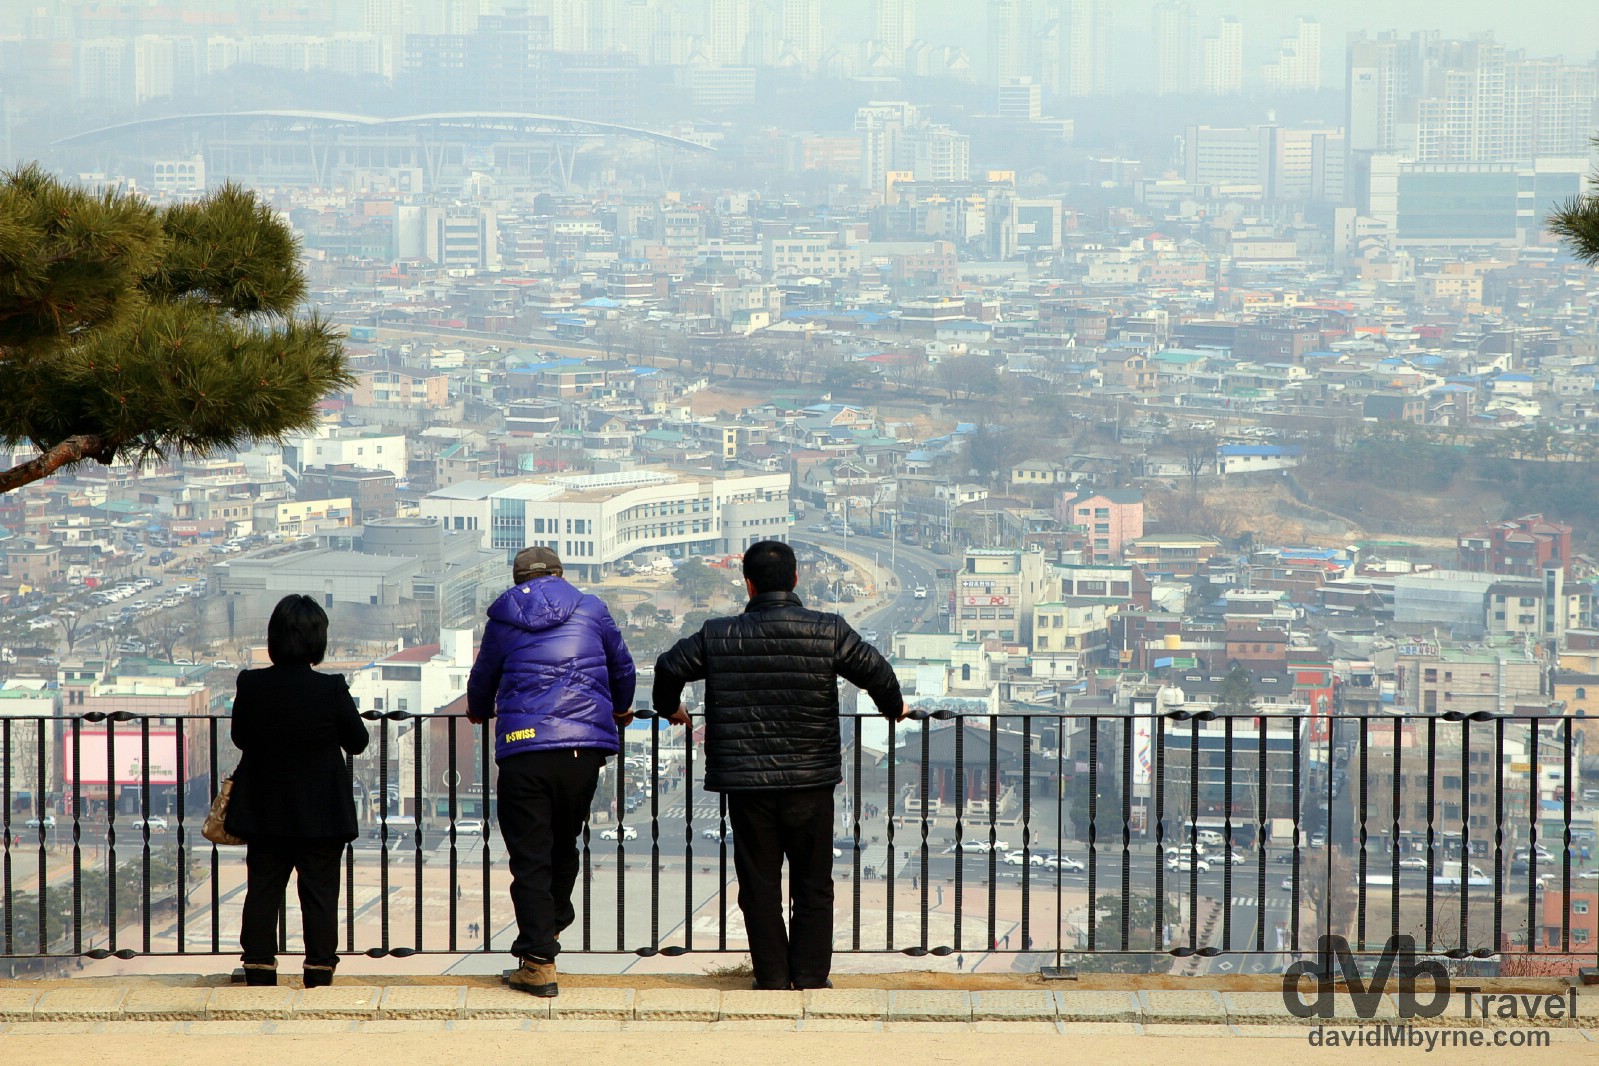 Viewing Sewon from atop Paldansan (Mt. Paldan), the highest point of Suwon Hwaseong Fortress in Suwon, South Korea. February 23rd, 2014. 